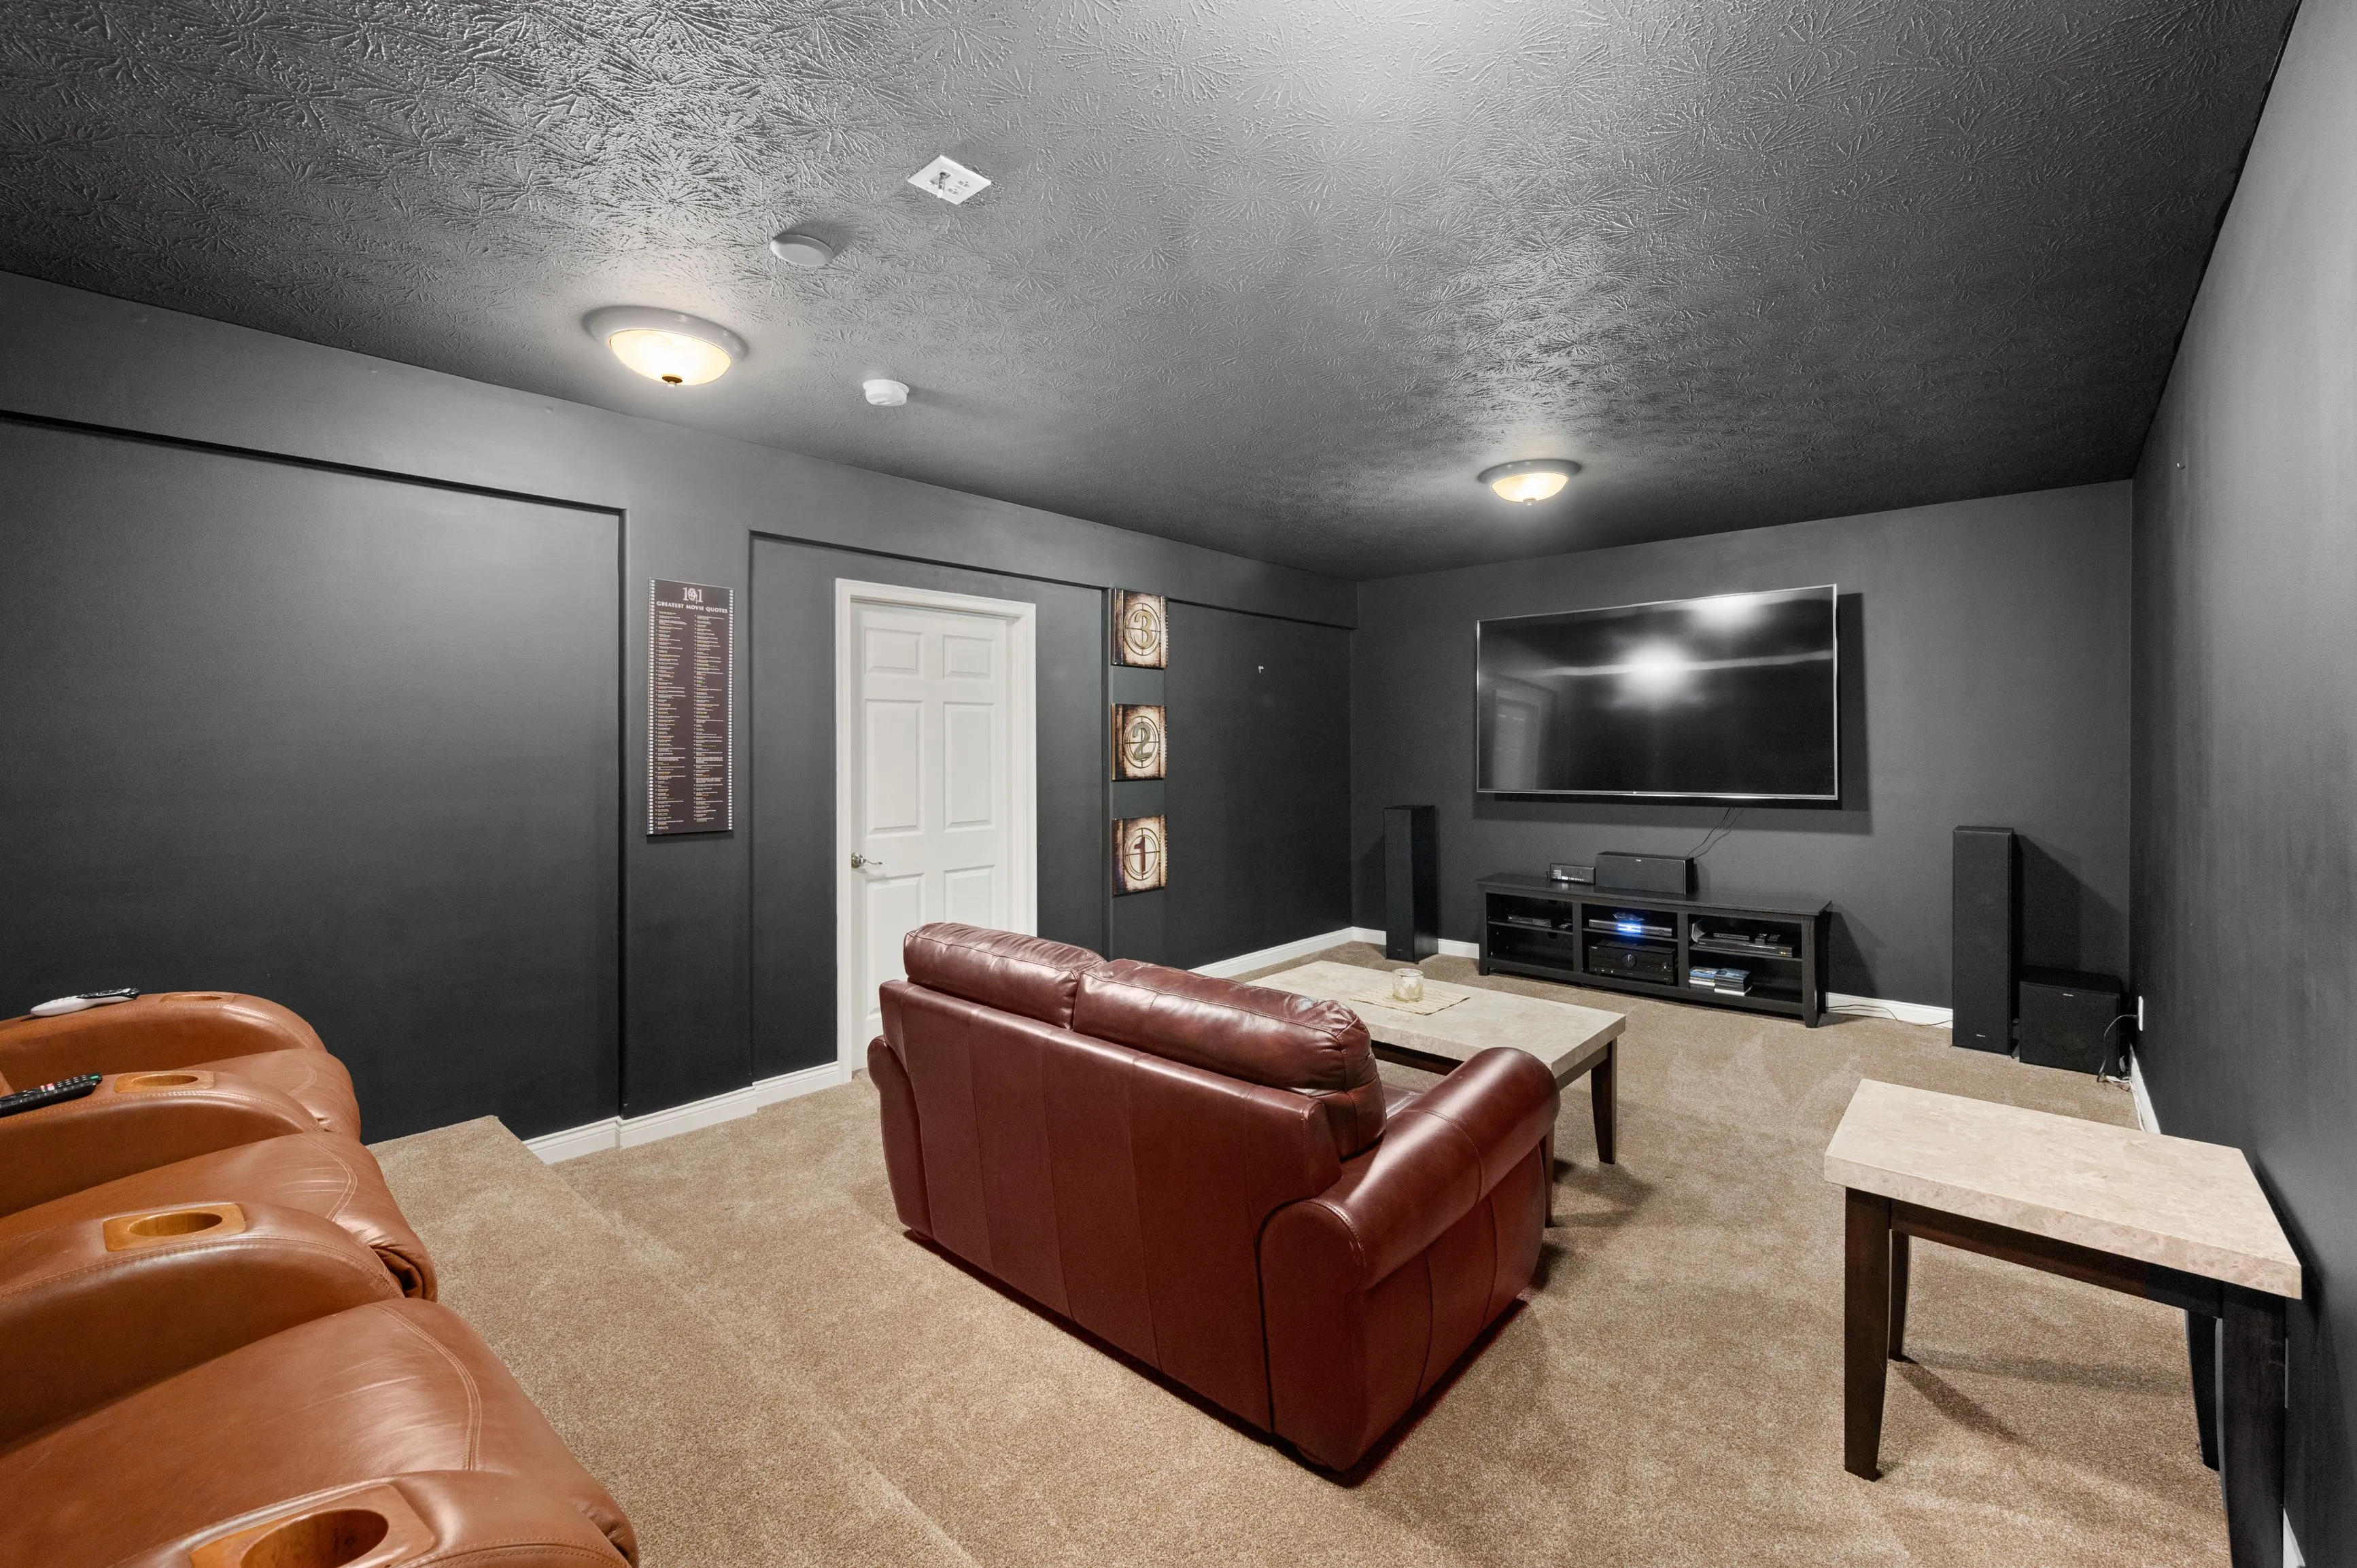 Modern home theater room with black walls, tiered brown leather seating, large flat-screen TV, and recessed ceiling lighting.